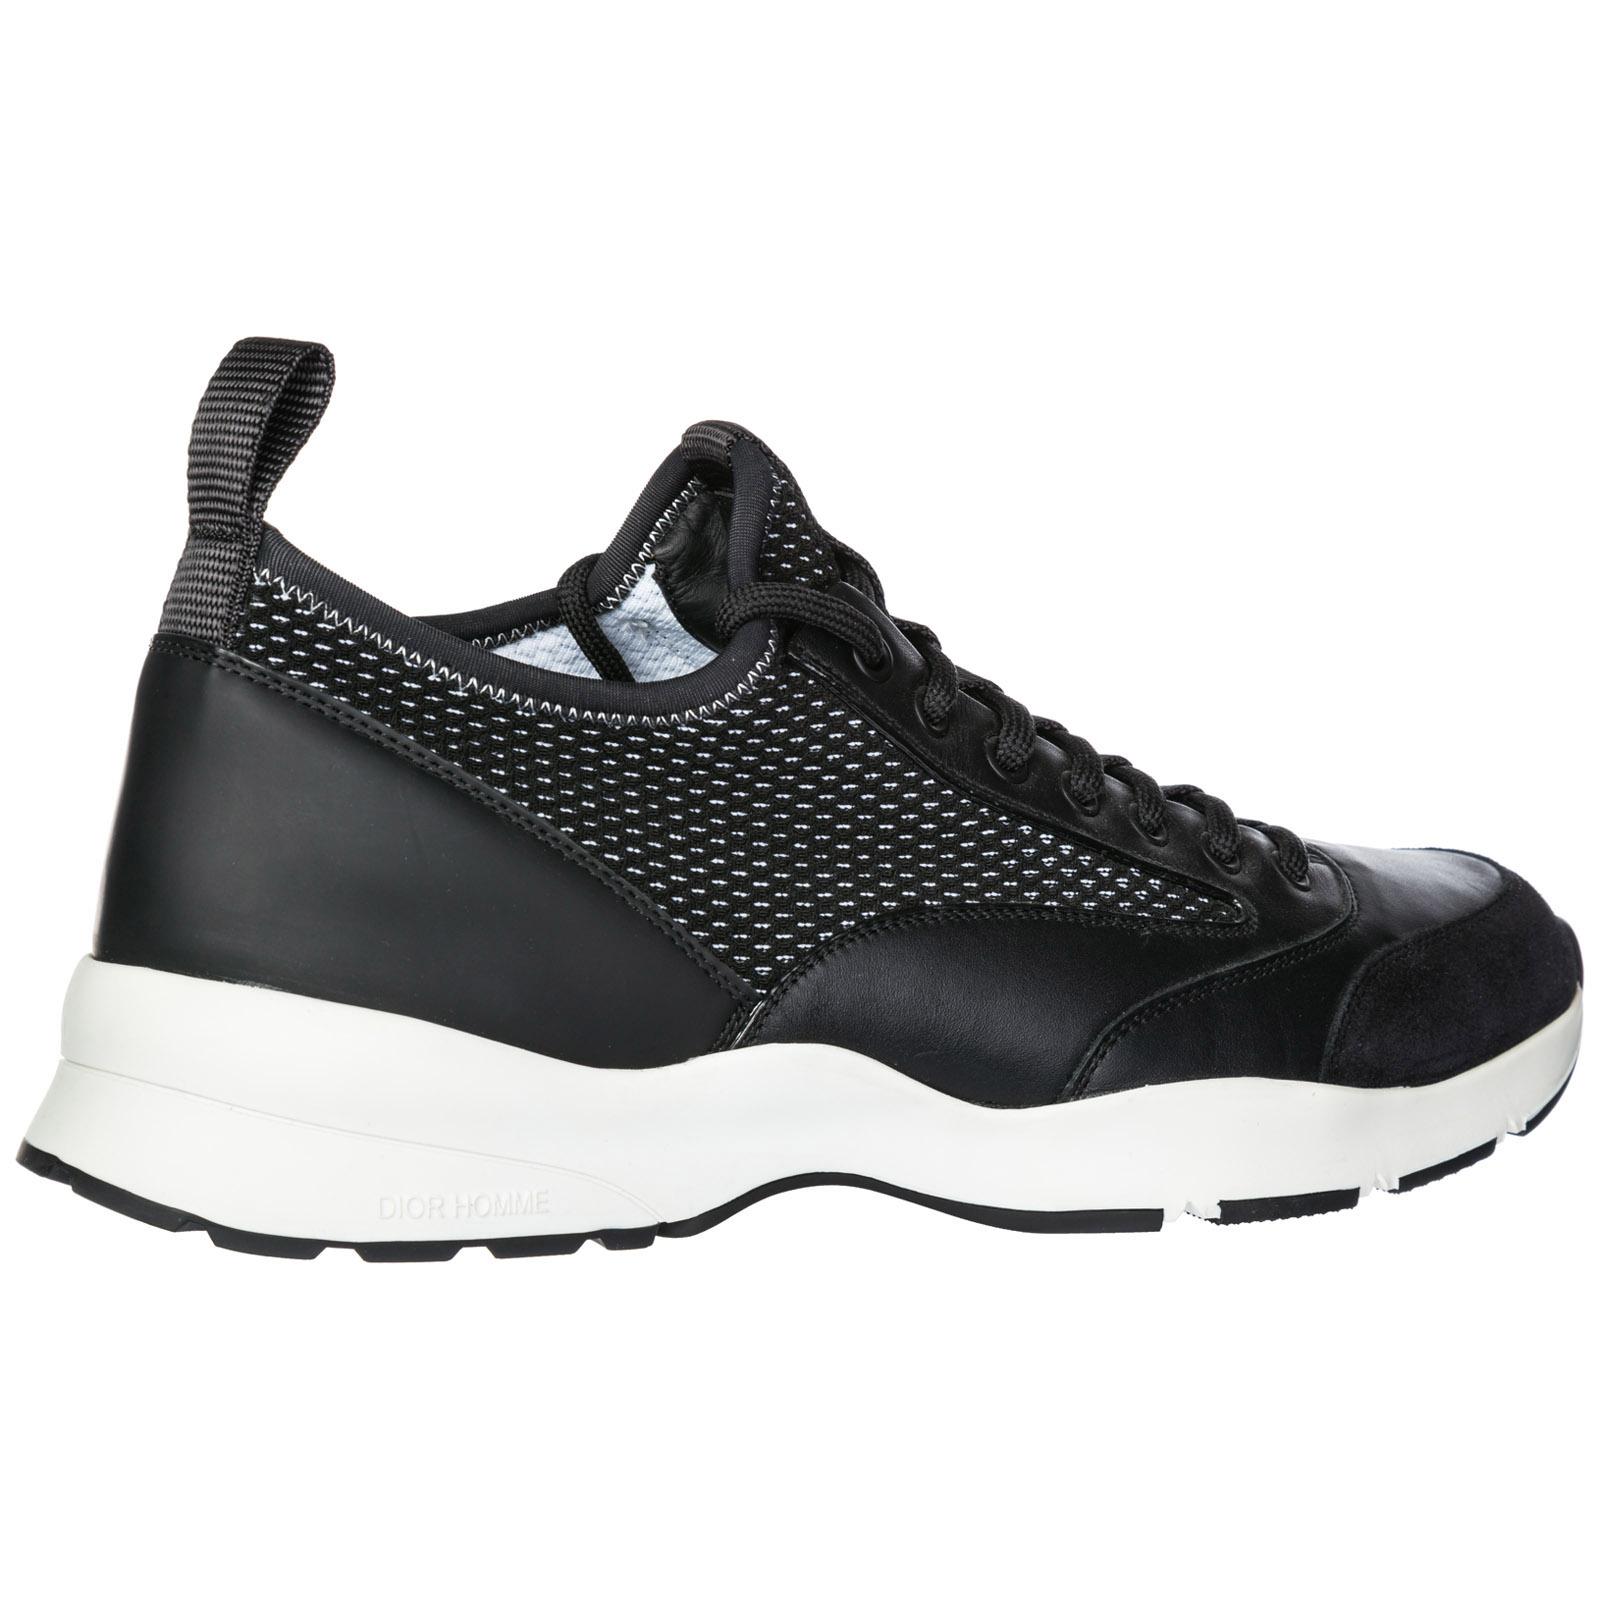 Dior Men's Shoes Leather Trainers Sneakers in Black for Men - Lyst